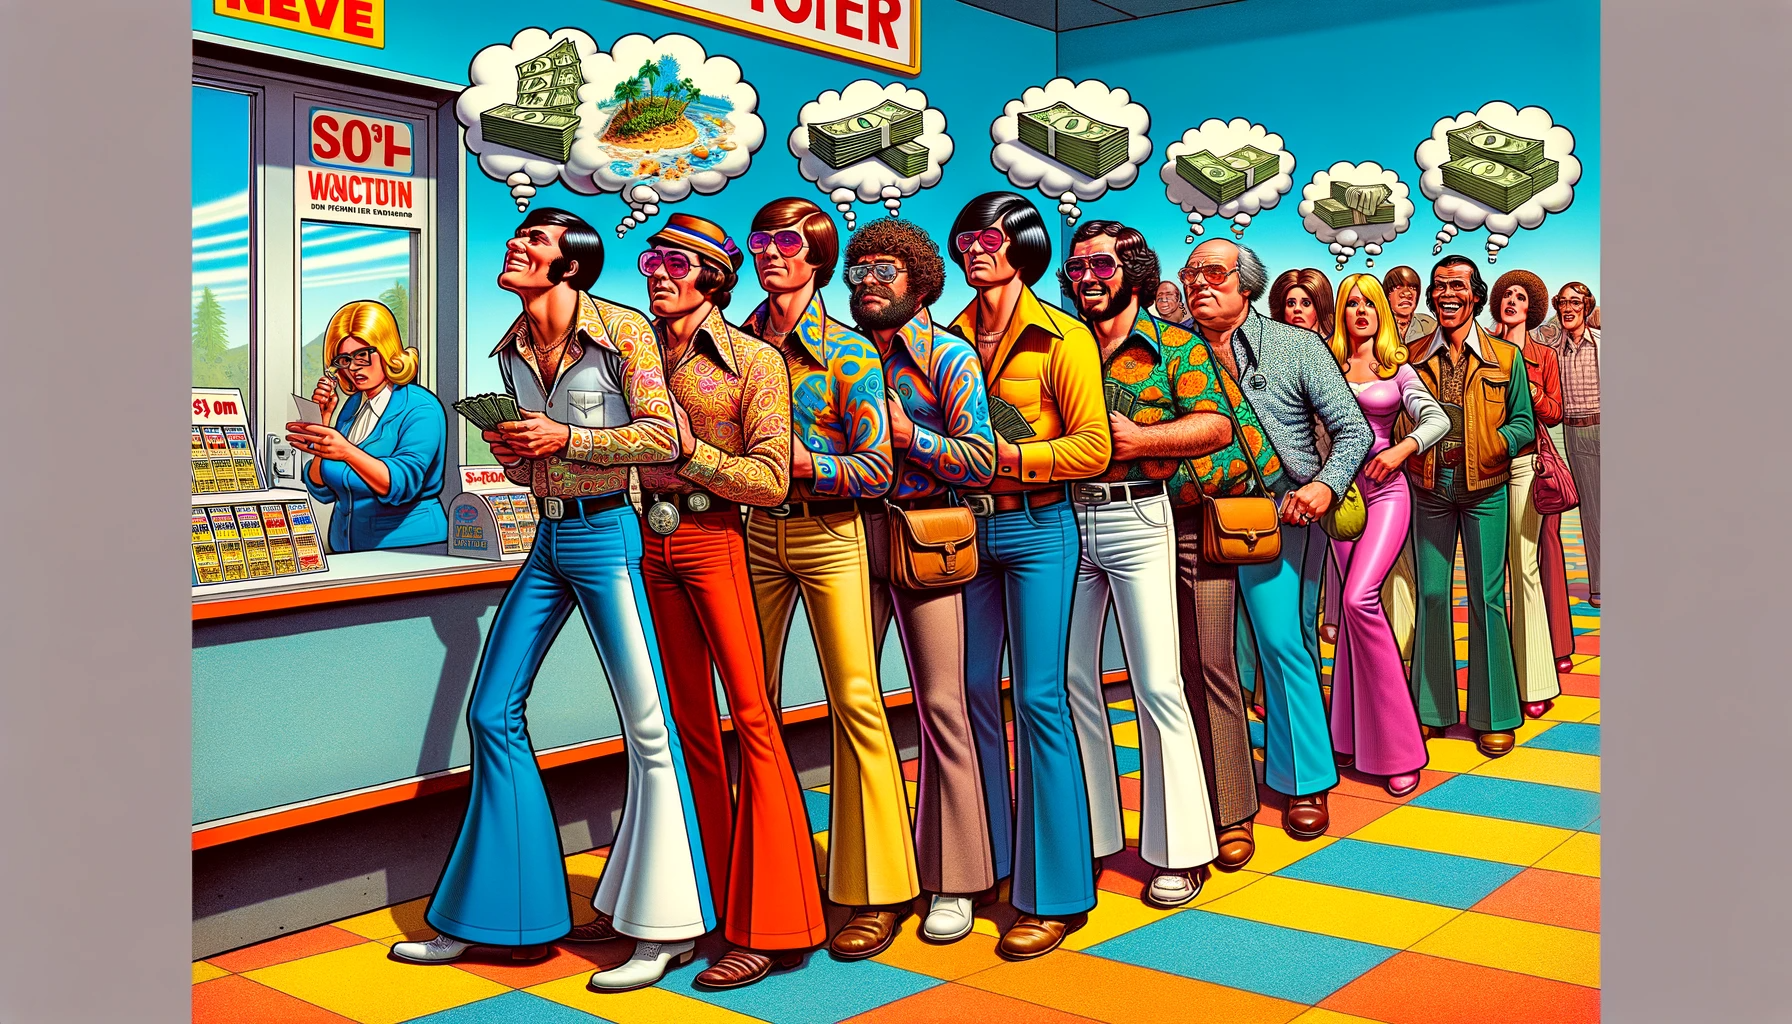 DALL·E 2023 11 07 14.53.13 Depict a humorous and vibrant 1972 scene at a store where patrons are queuing up to buy lottery tickets. The focal point is a man with friends all sp